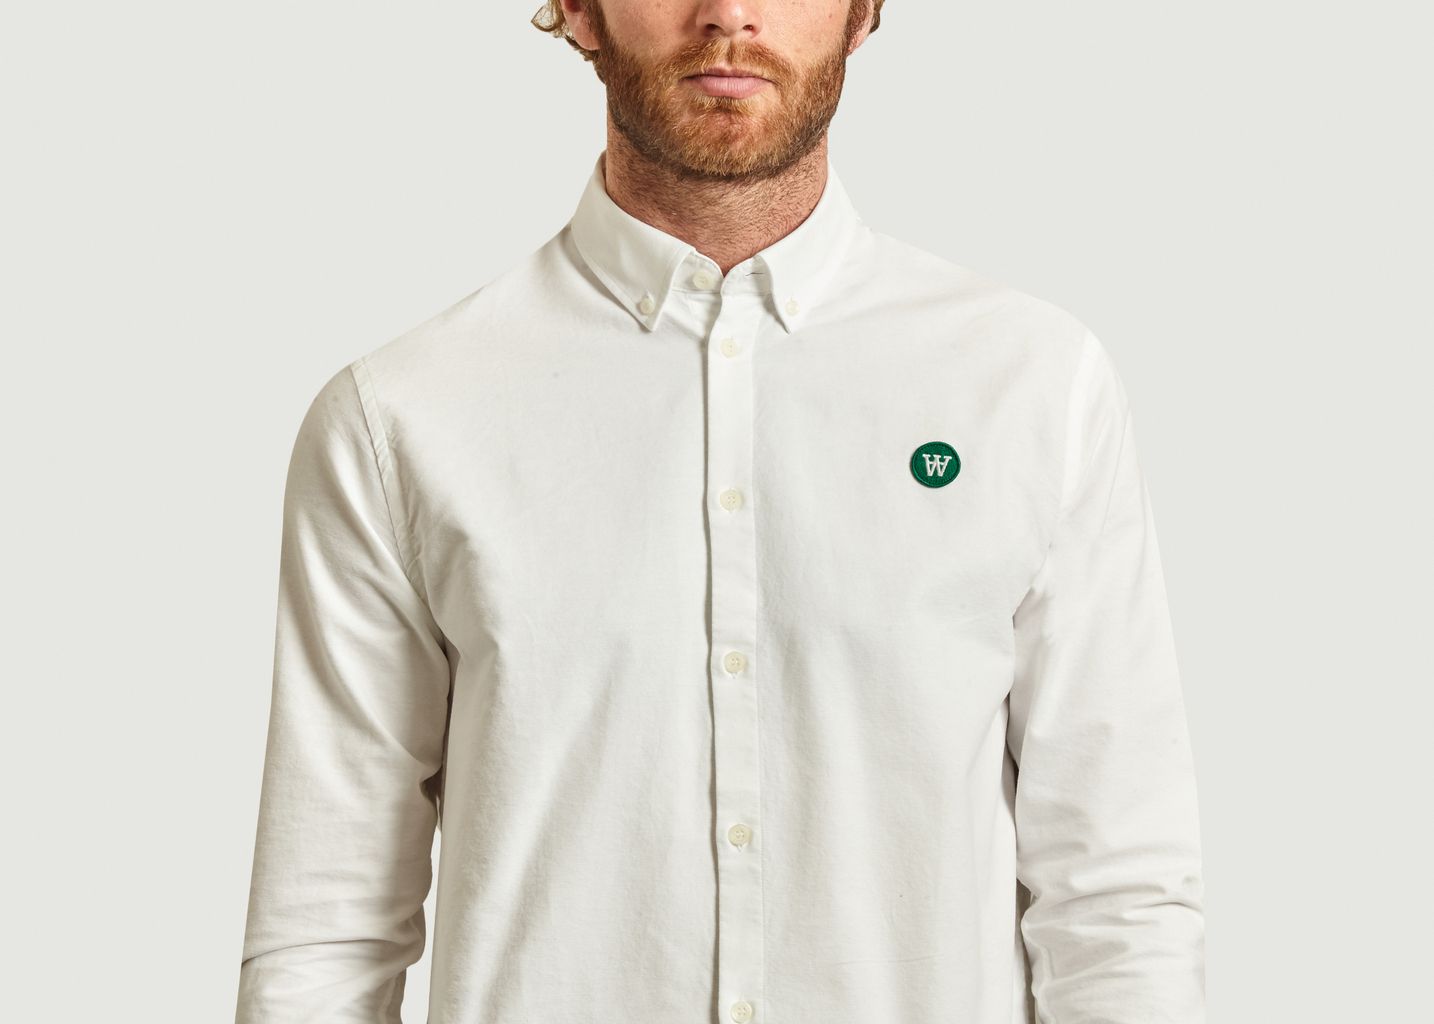 Double A Ted Oxford cotton shirt - Wood Wood